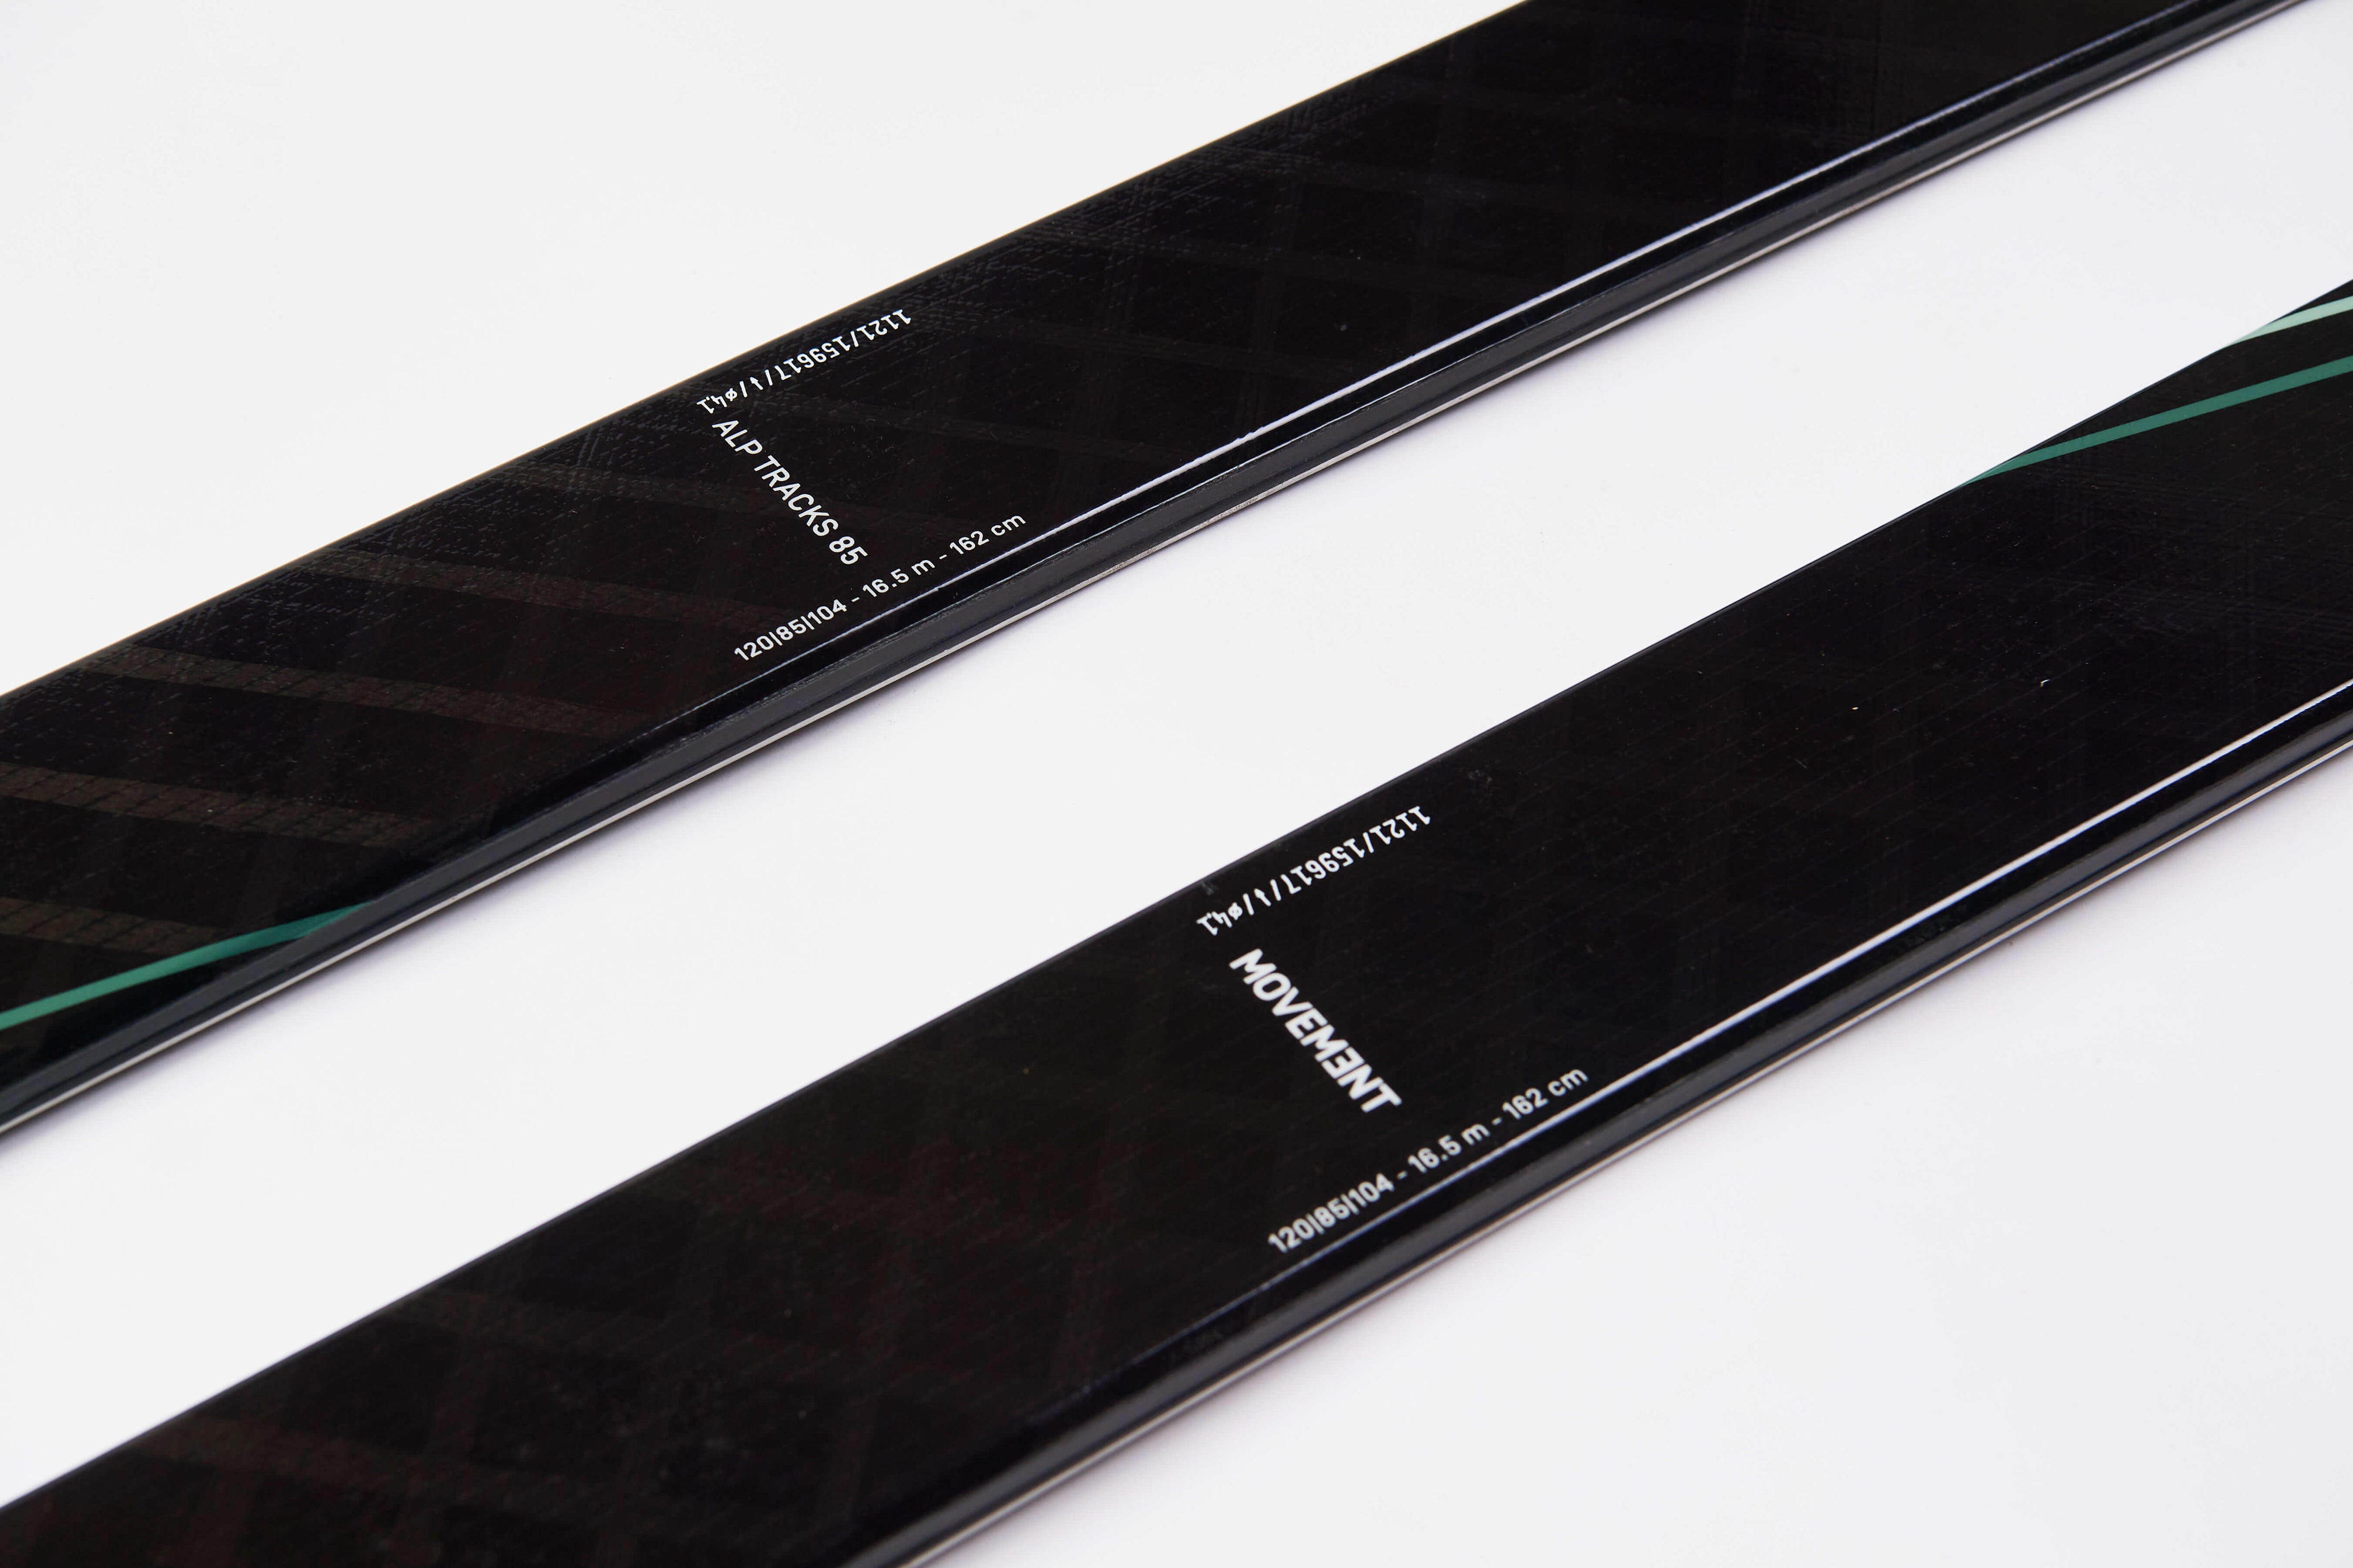 Discover the joy of touring with Movement's Alp Tracks 85W skis.